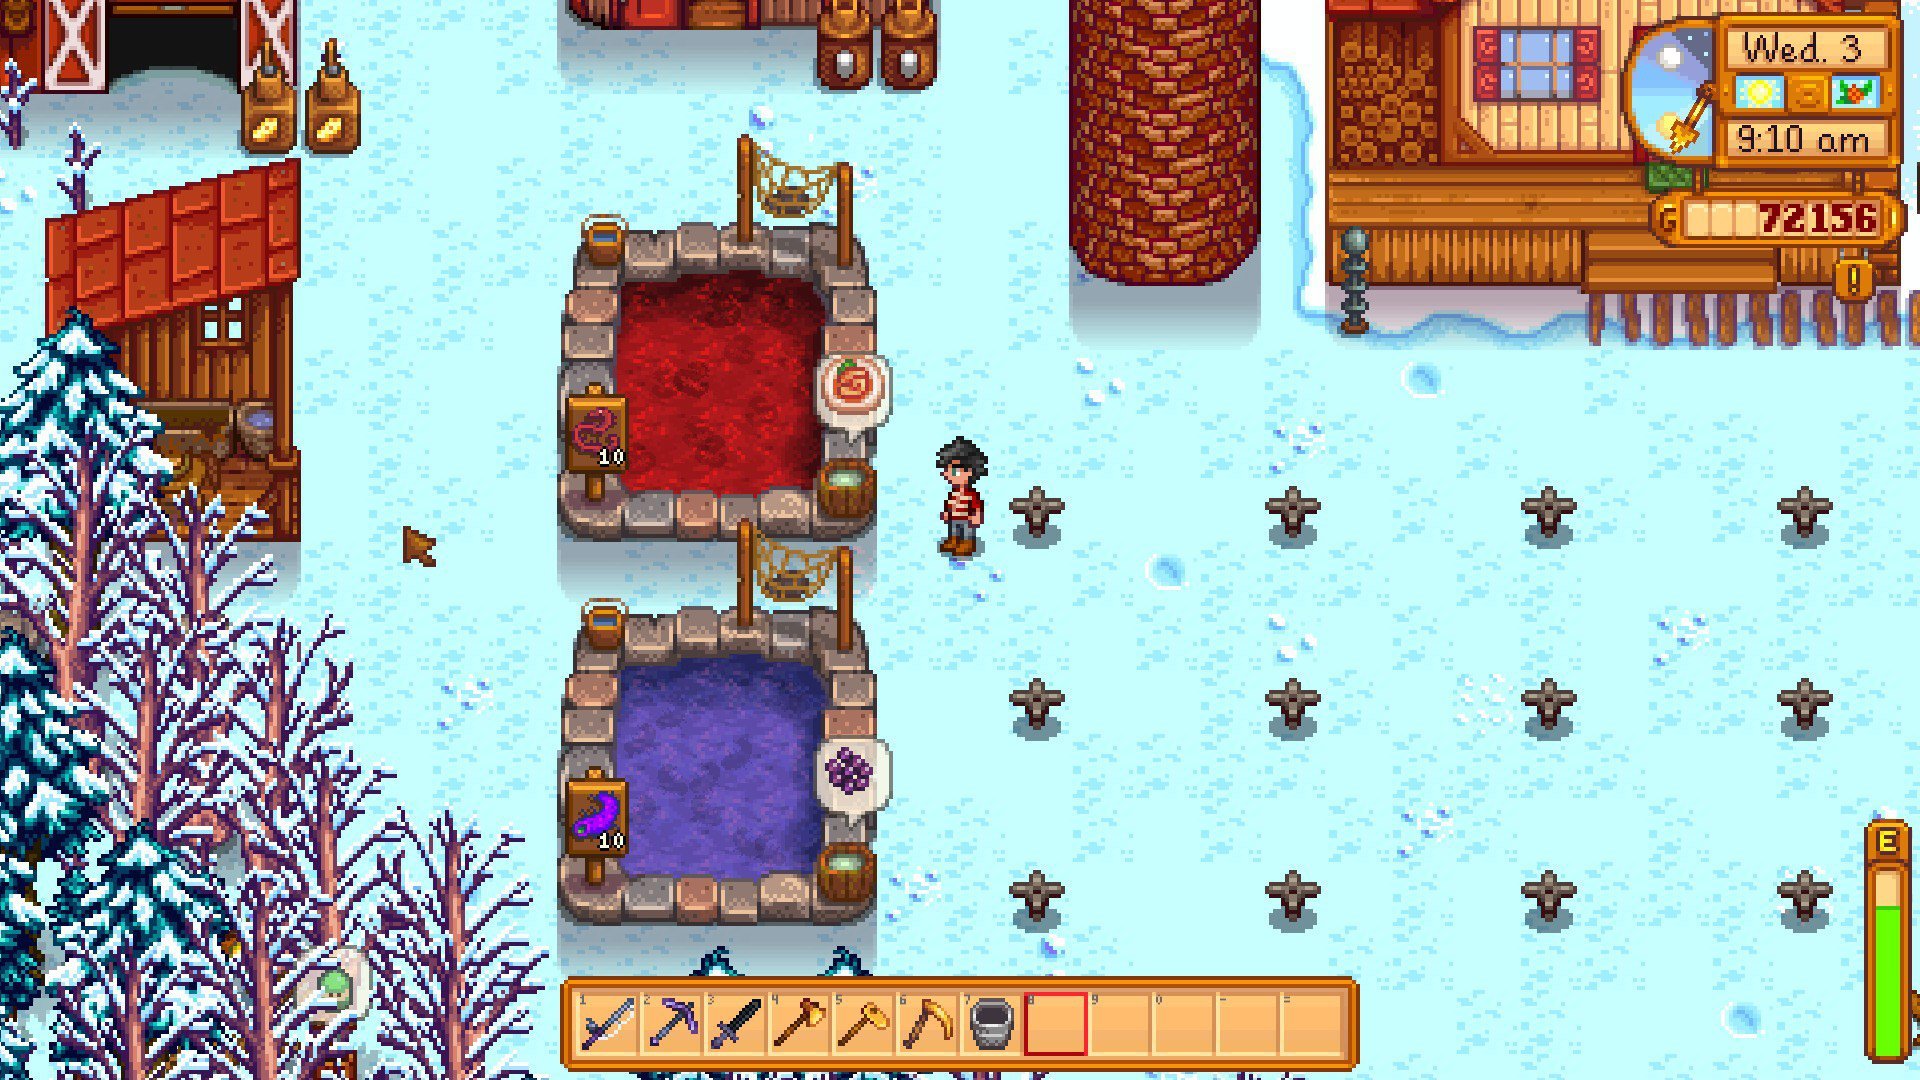 Stardew Valley: Where and Why You Should Fish – Students of the